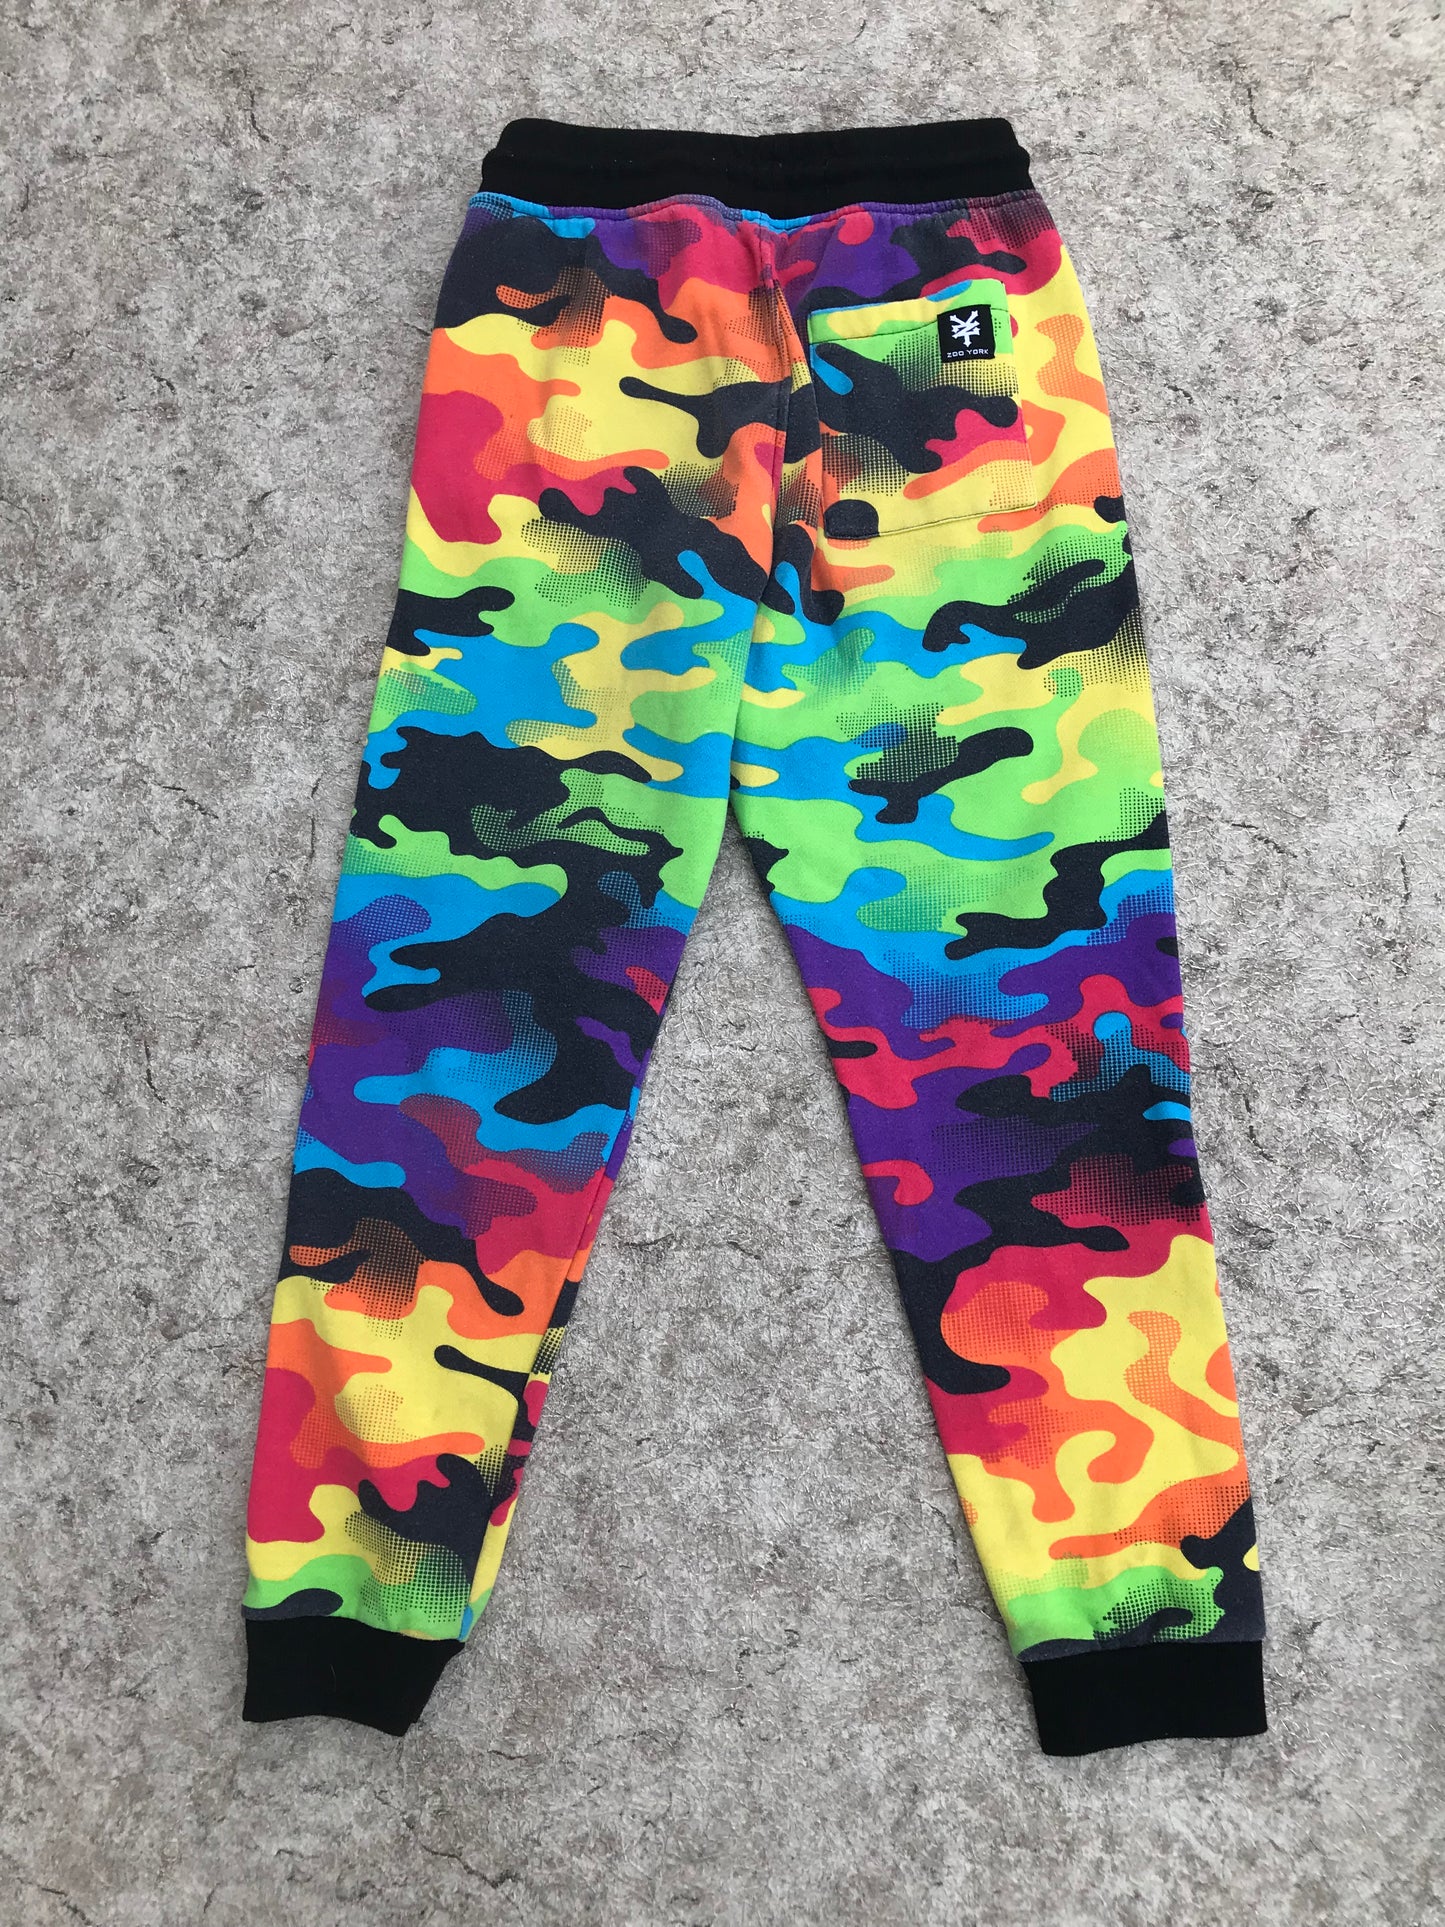 Sweat Pants Child Size Large 14 Youth Zoo Yorker Multi Color CB9437